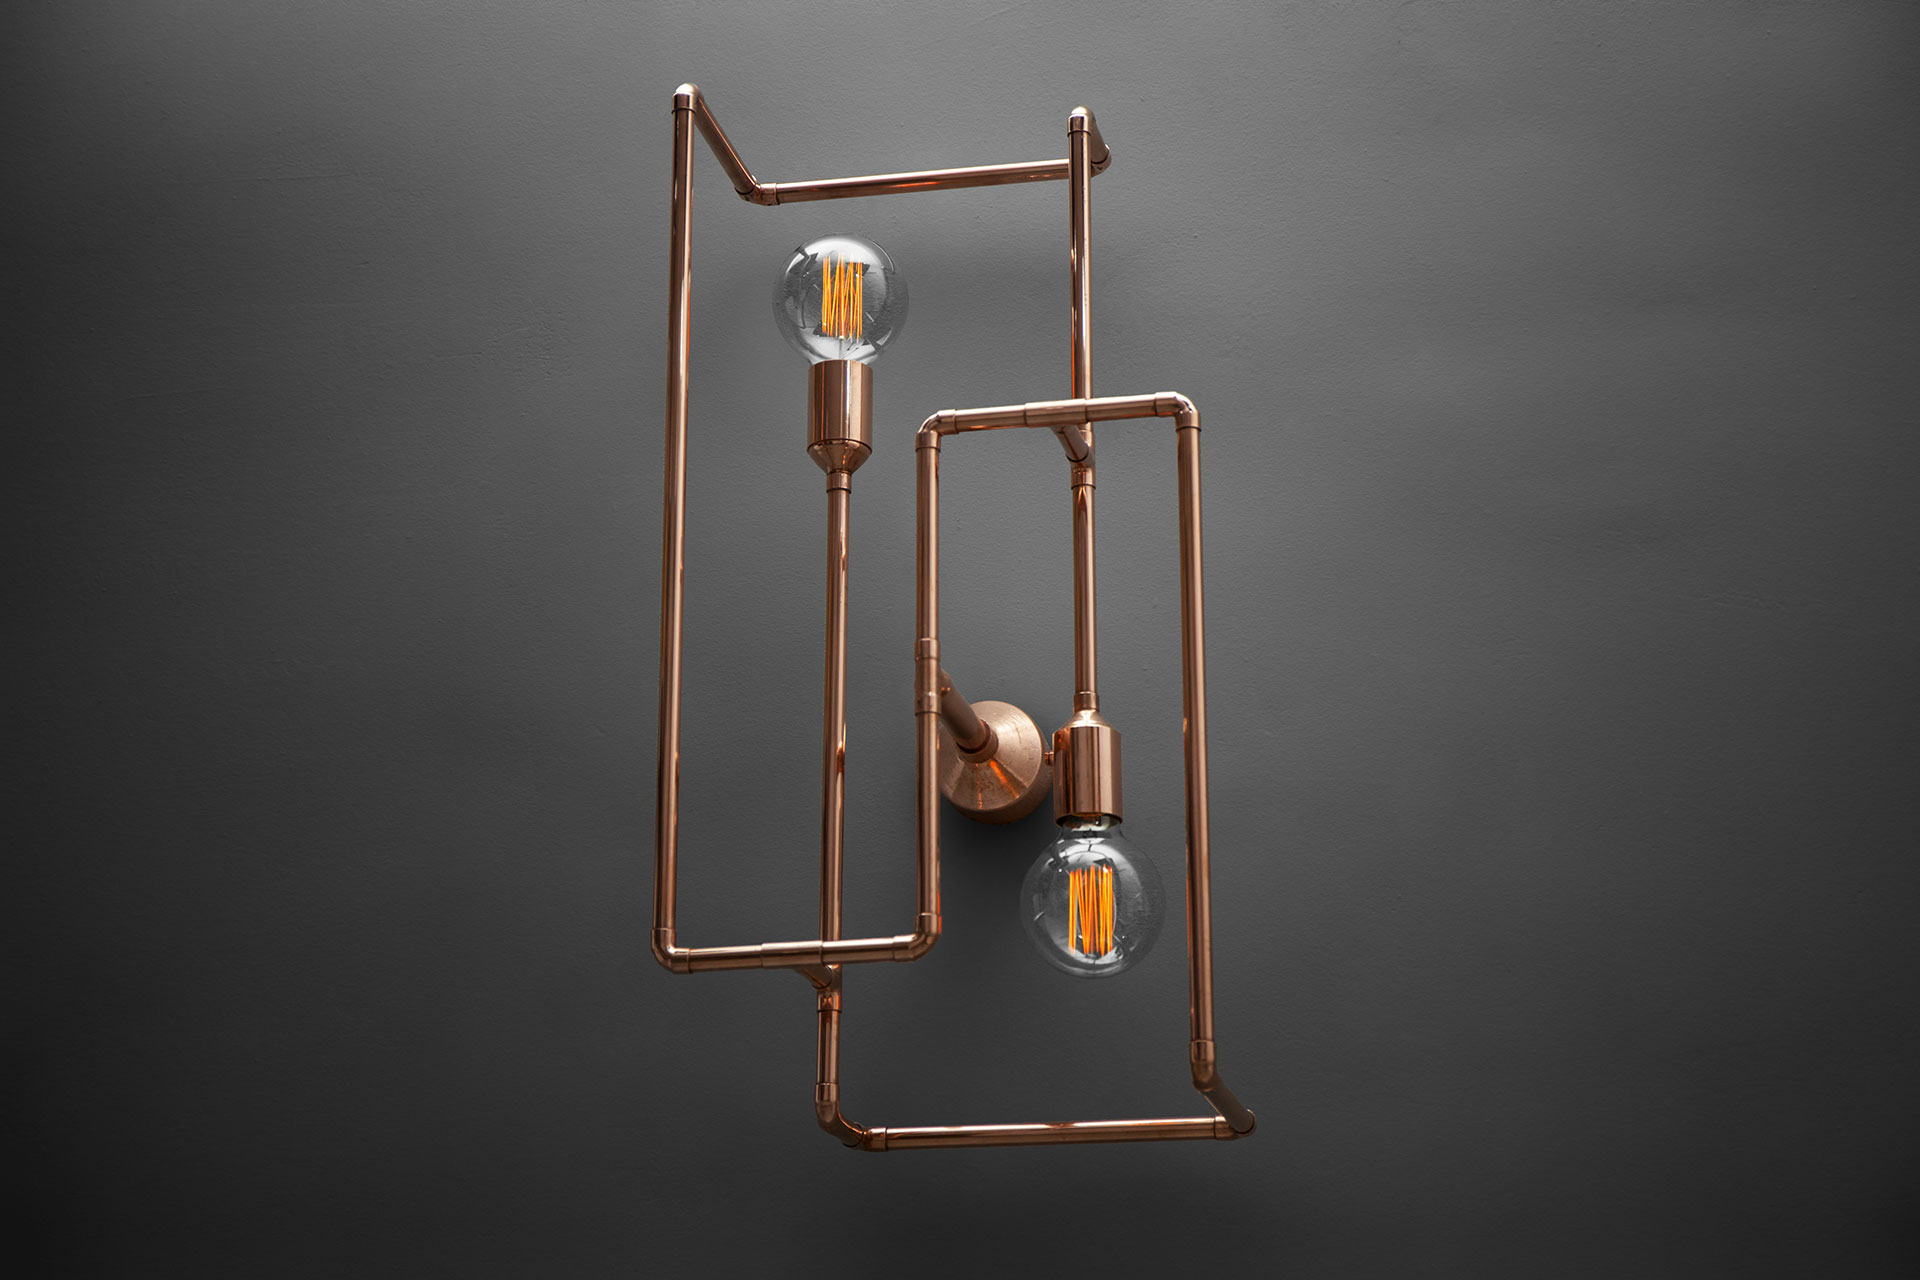 Large decorative copper sconce in loft style restaurant